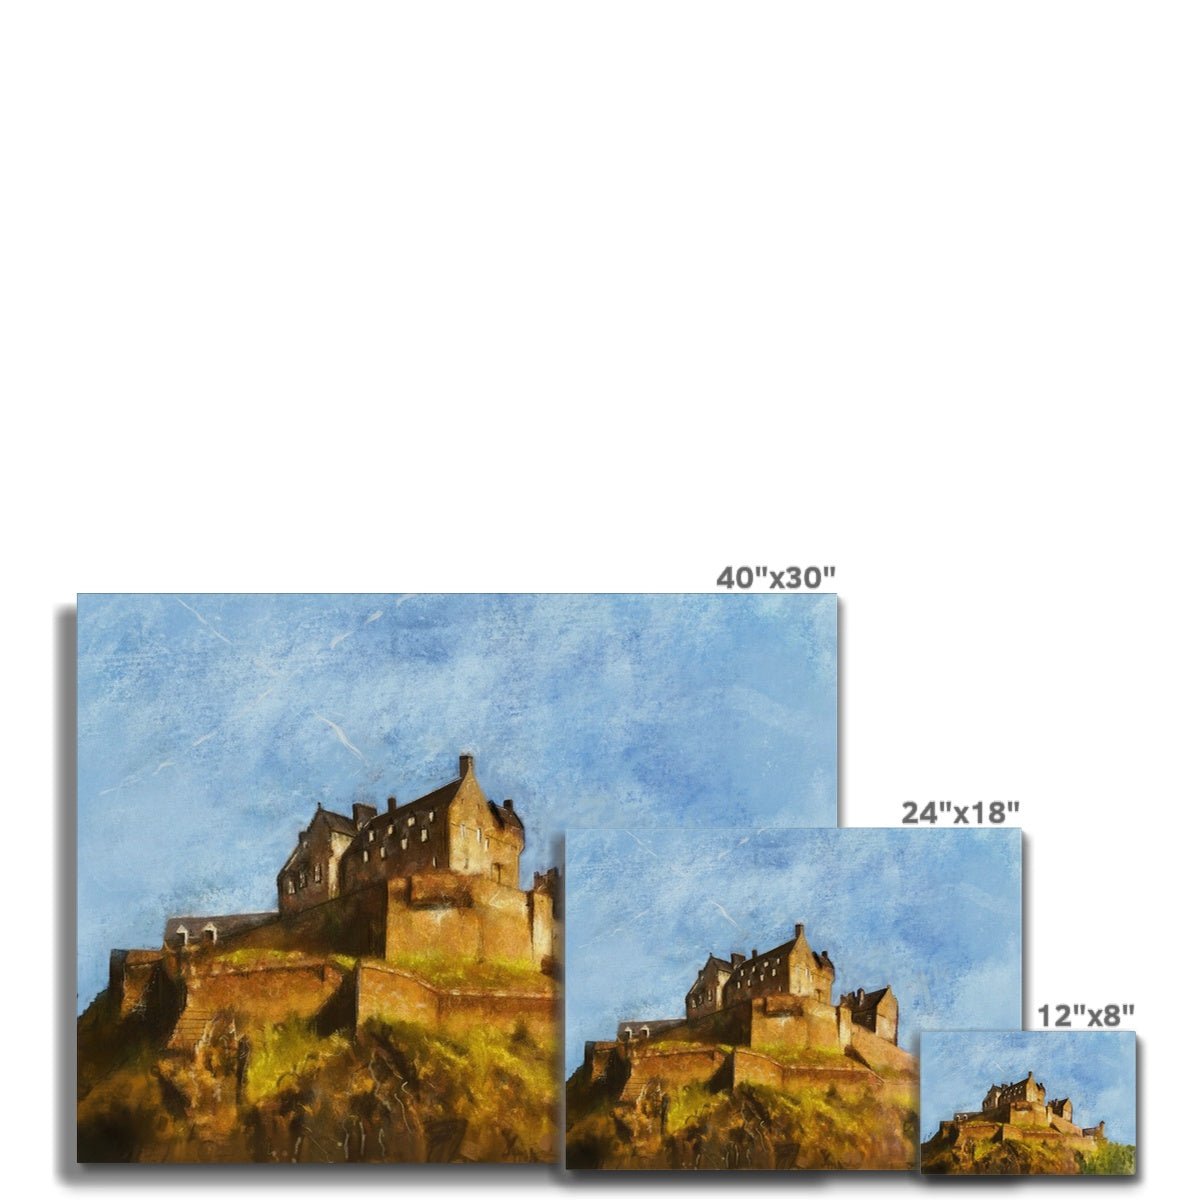 Edinburgh Castle Painting | Canvas From Scotland-Contemporary Stretched Canvas Prints-Edinburgh & Glasgow Art Gallery-Paintings, Prints, Homeware, Art Gifts From Scotland By Scottish Artist Kevin Hunter